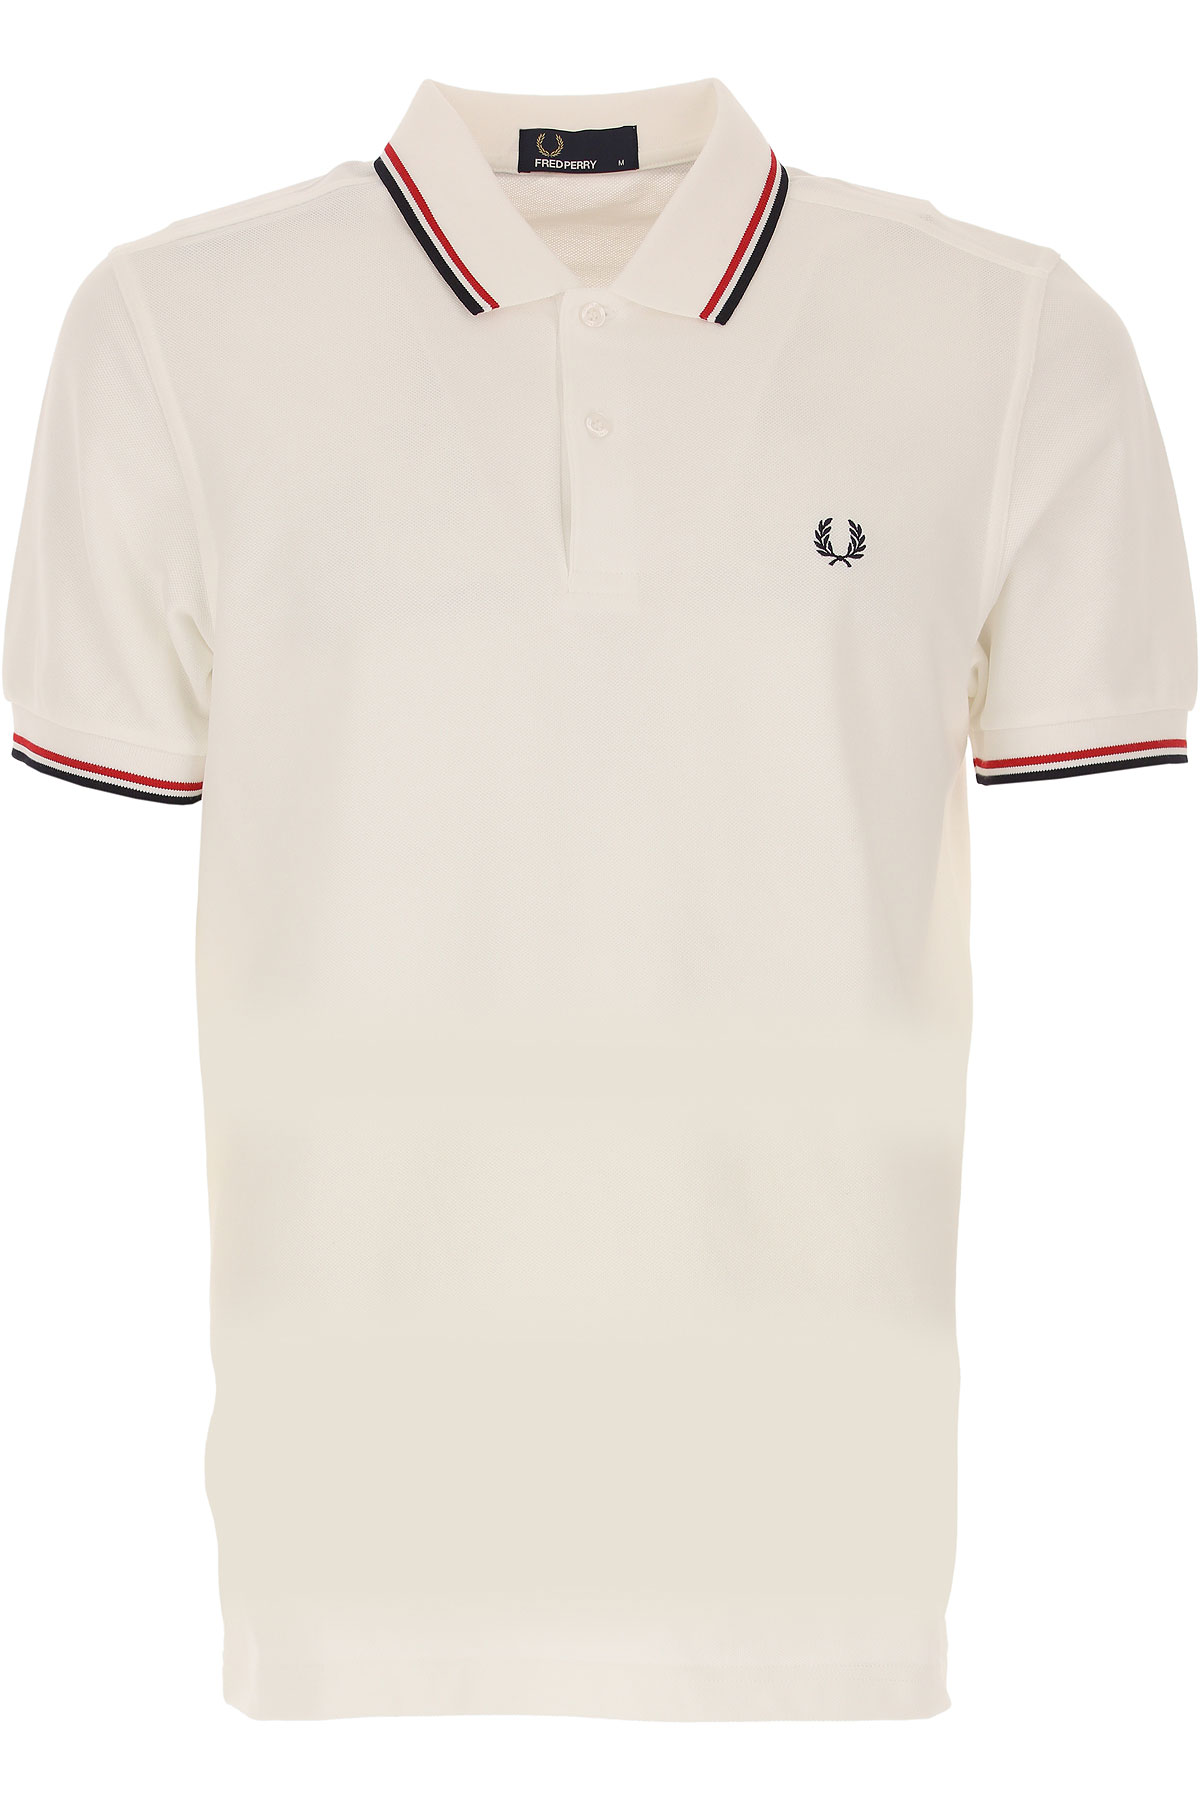 Mens Clothing Fred Perry, Style code: m3600-748-